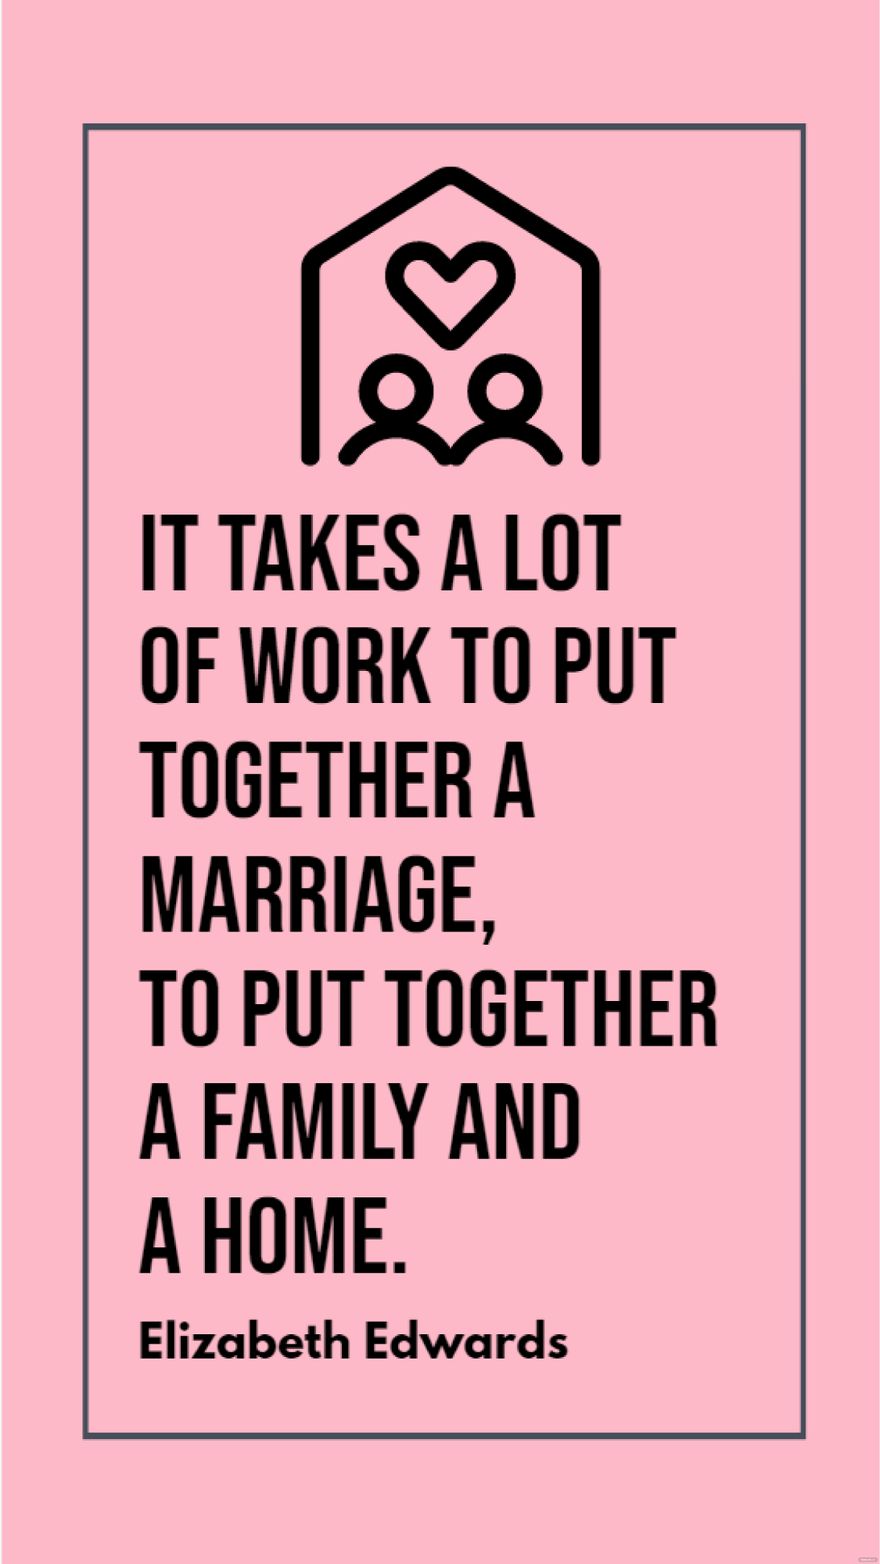 Elizabeth Edwards - It takes a lot of work to put together a marriage, to put together a family and a home.